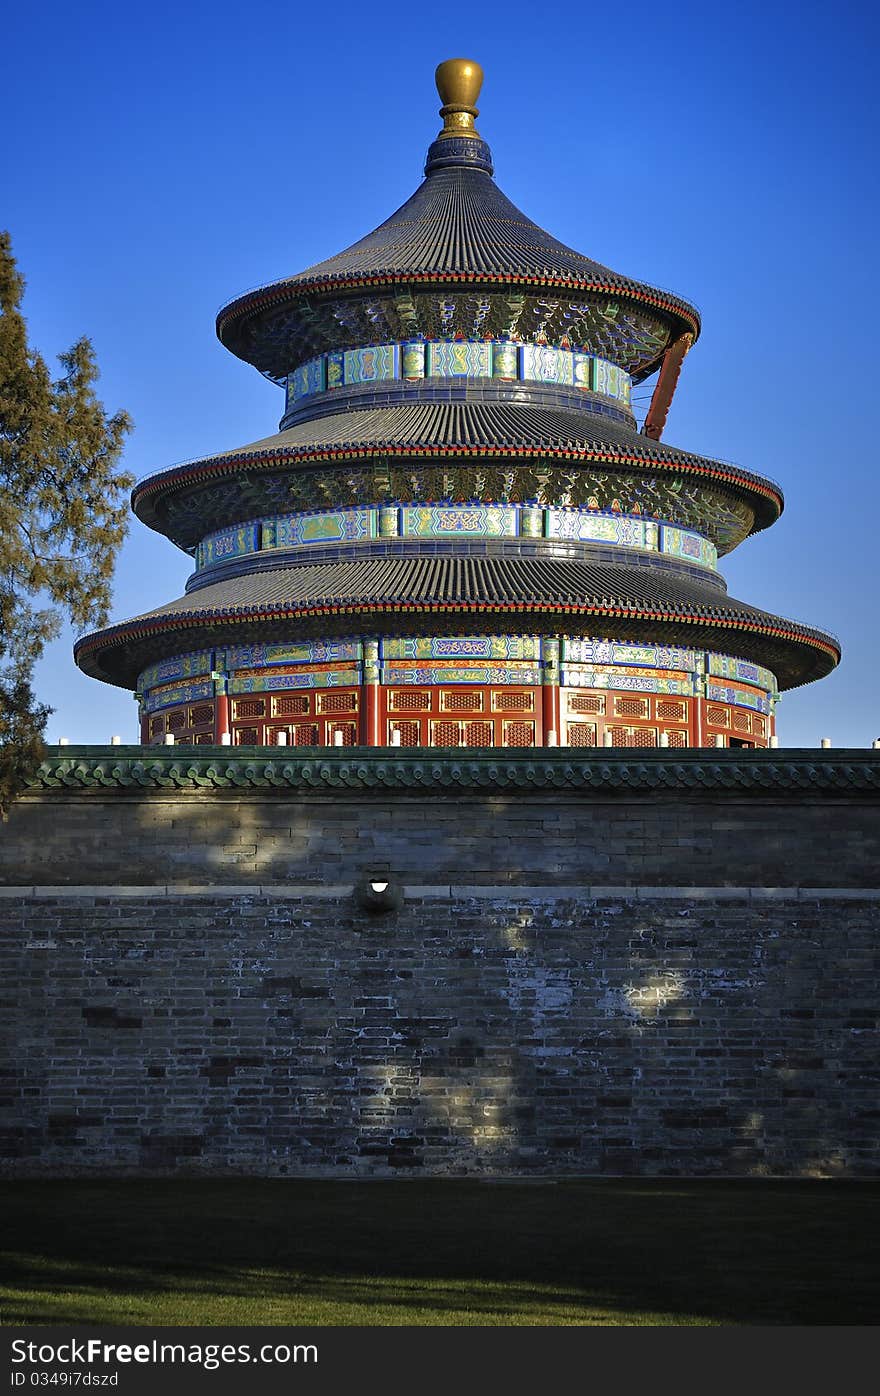 Temple of Heaven is representative of traditional Chinese architecture.
Temple of Heaven not only is Chinese the thou construct in the bright bright pearl, also is the treasure that the world constructs a history. Temple of Heaven is representative of traditional Chinese architecture.
Temple of Heaven not only is Chinese the thou construct in the bright bright pearl, also is the treasure that the world constructs a history.